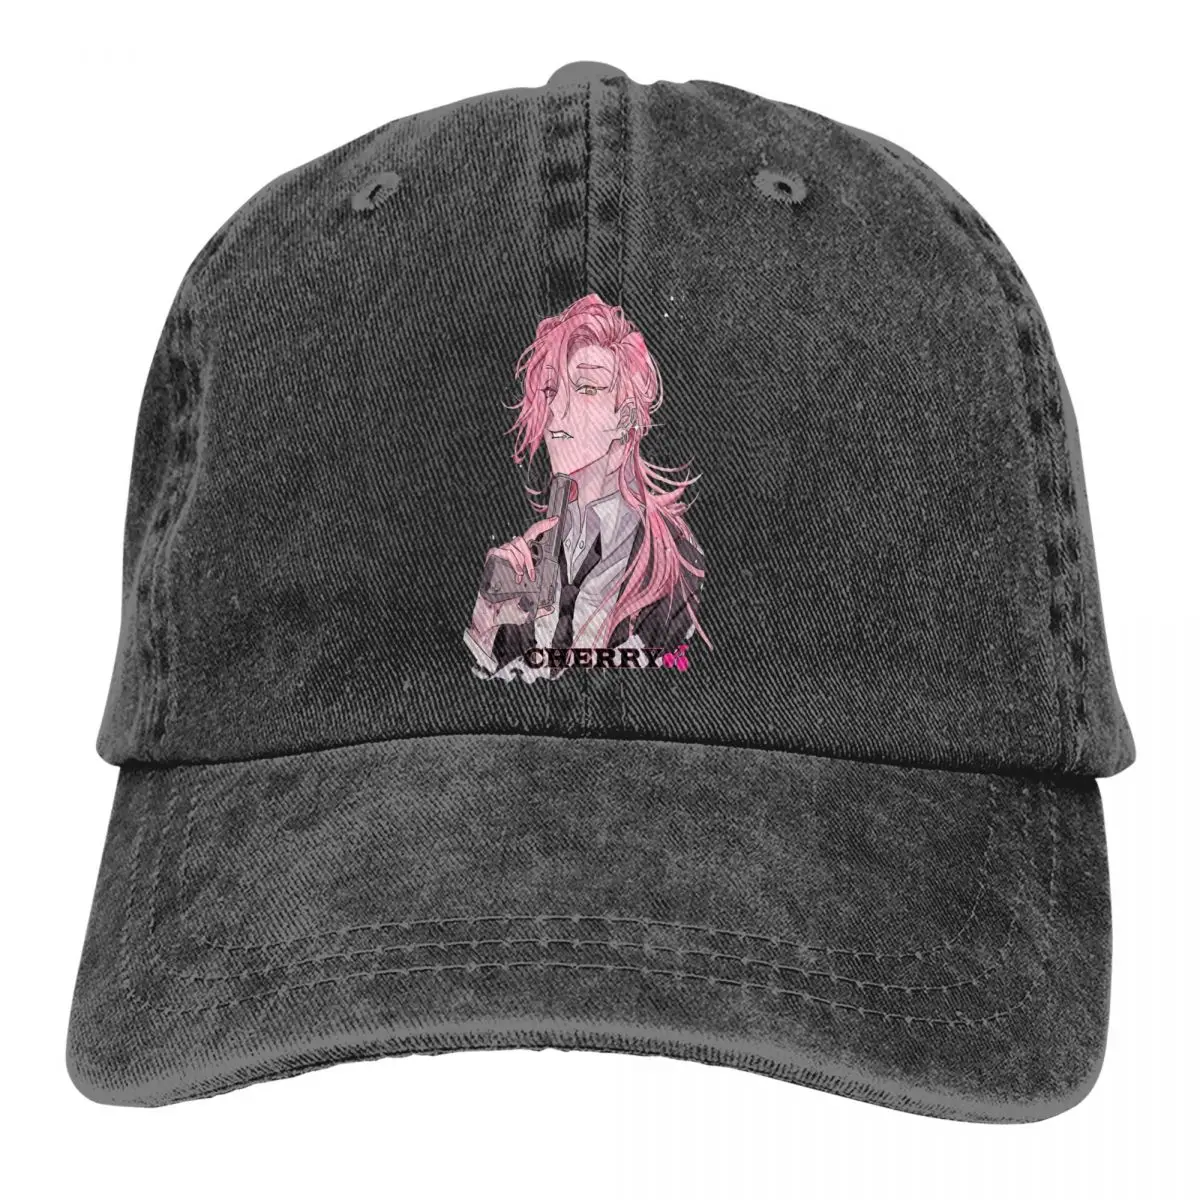 

Pure Color Dad Hats Pink Hair Women's Hat Sun Visor Baseball Caps Sk8 The Infinity Snow Sports Anime Peaked Cap